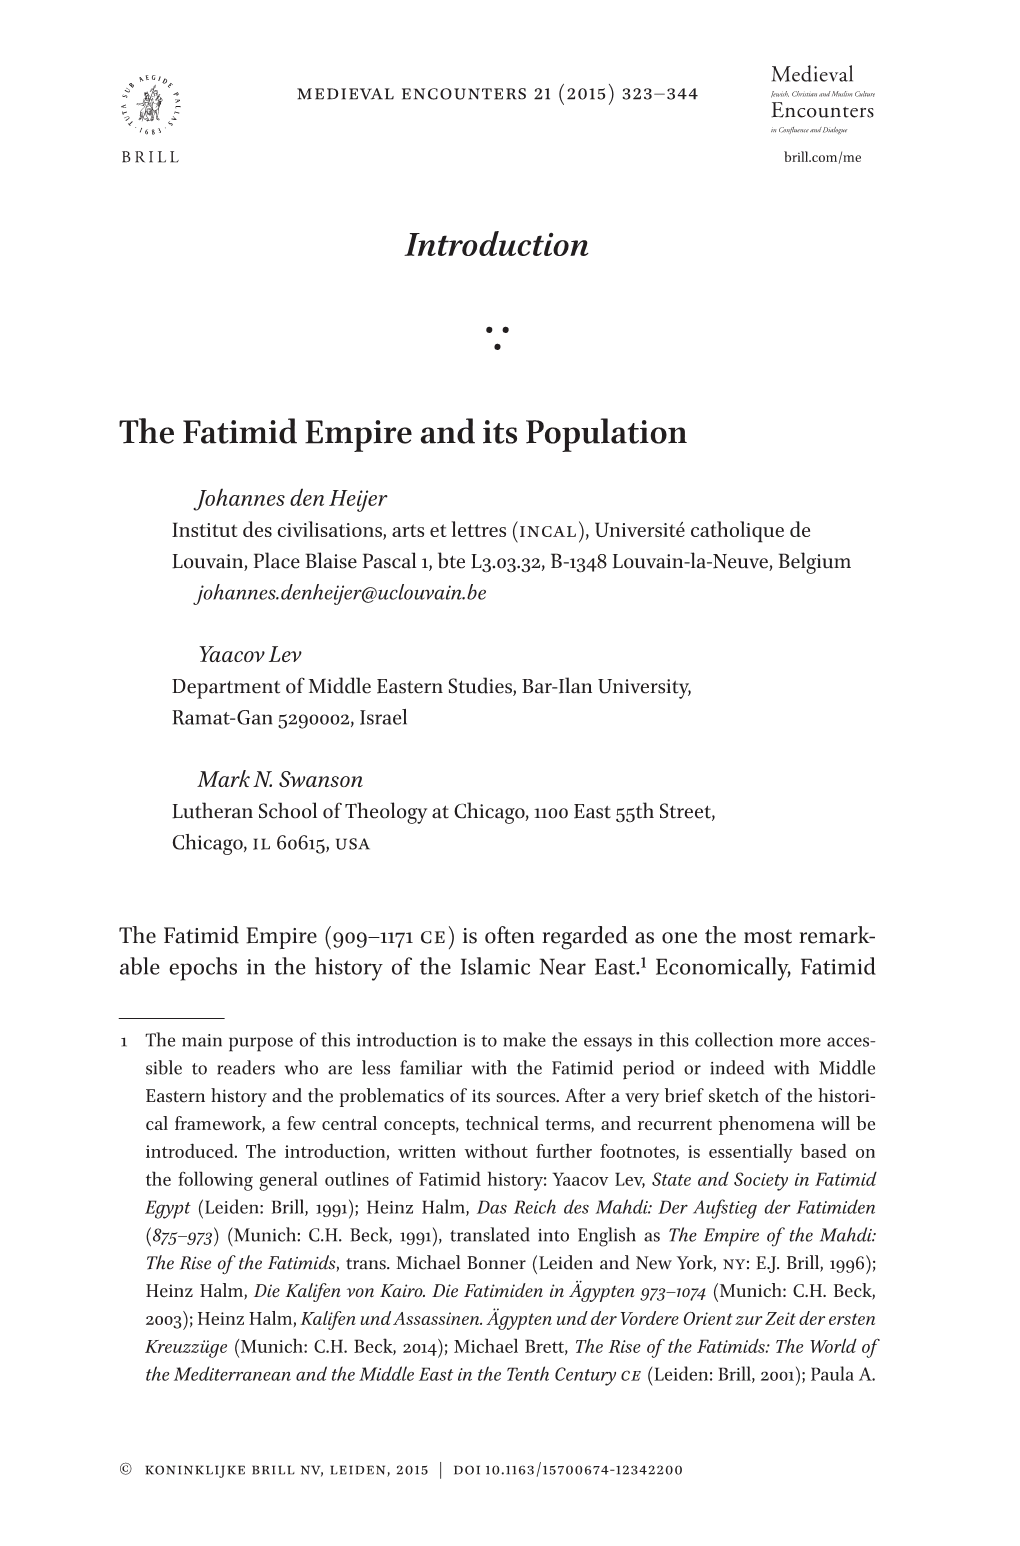 Introduction the Fatimid Empire and Its Population